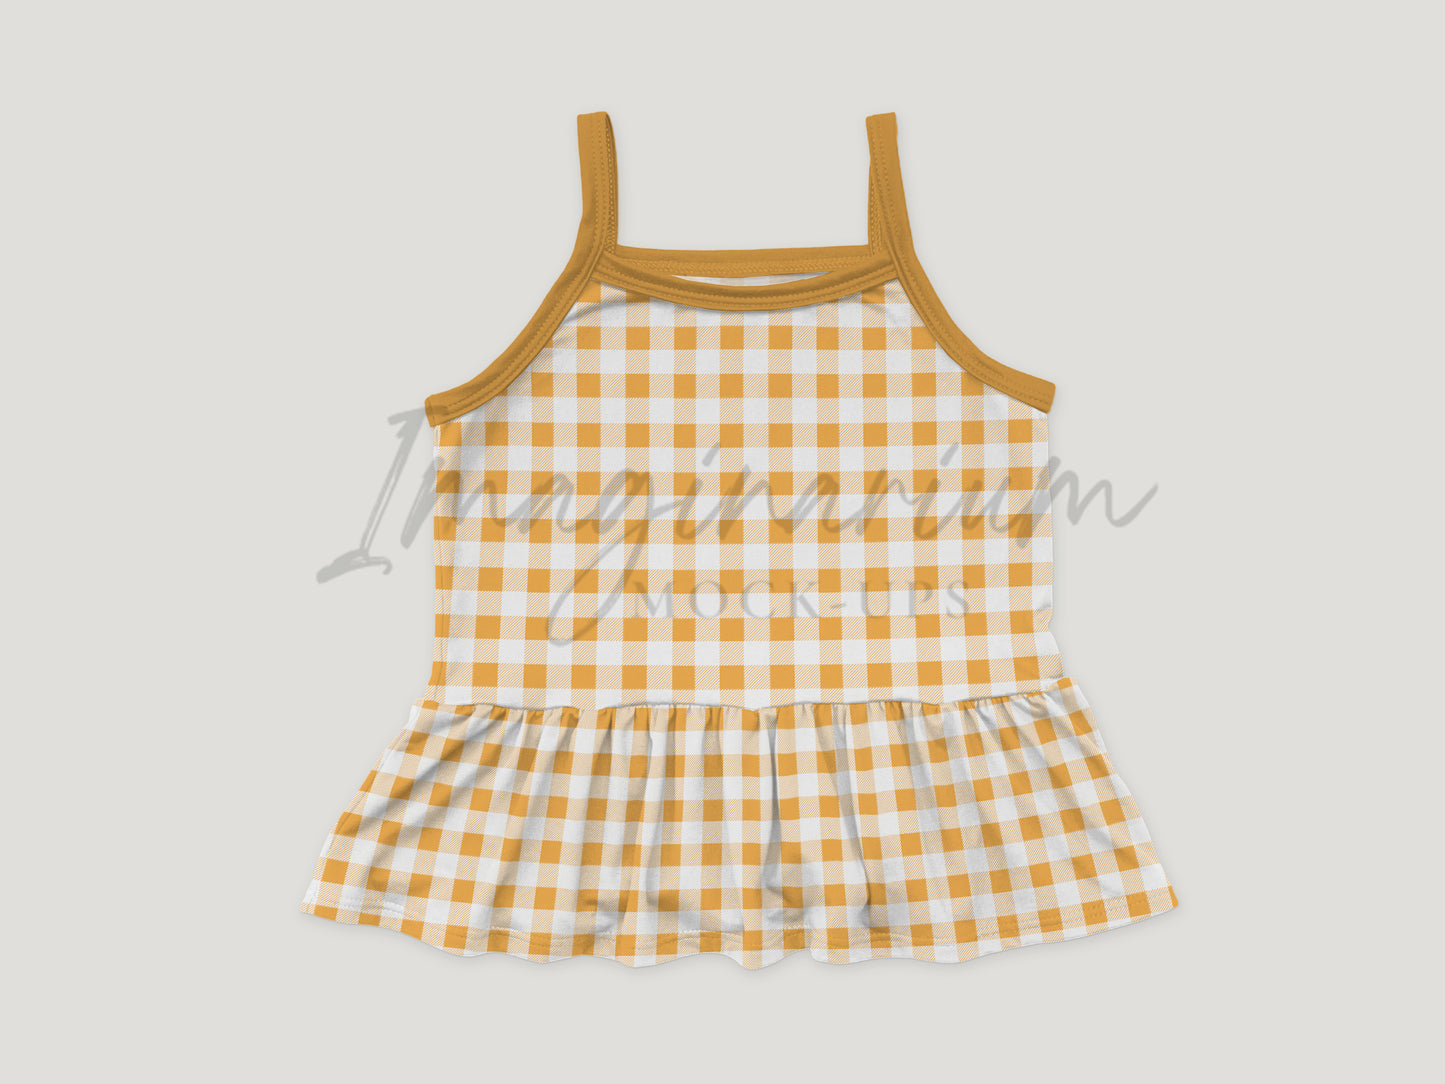 Summer Cami Peplum Tank Top Mock Up, Realistic Clothing Mockup for Photoshop and Procreate